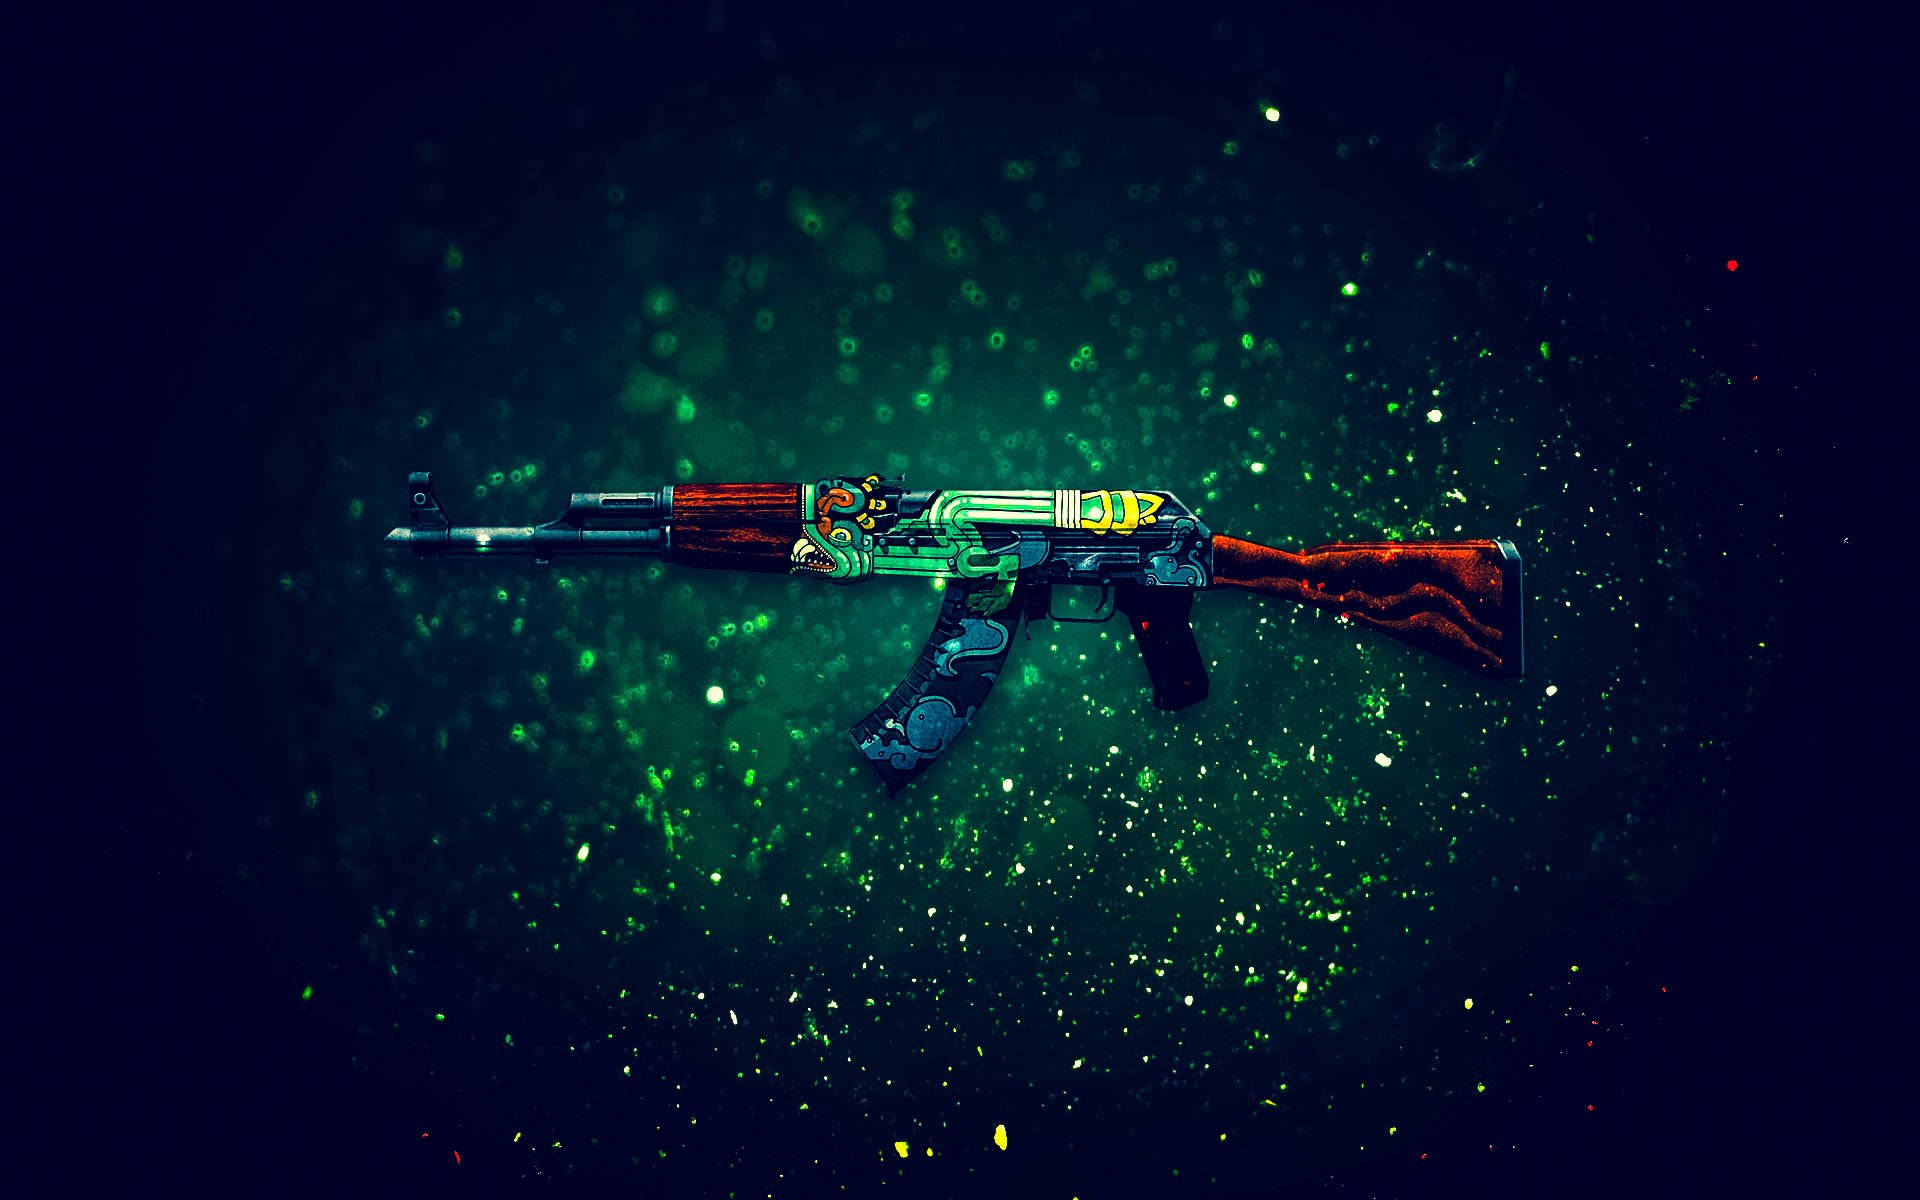 Dominate with the AK-47 in Counter-Strike: Global Offensive Wallpaper